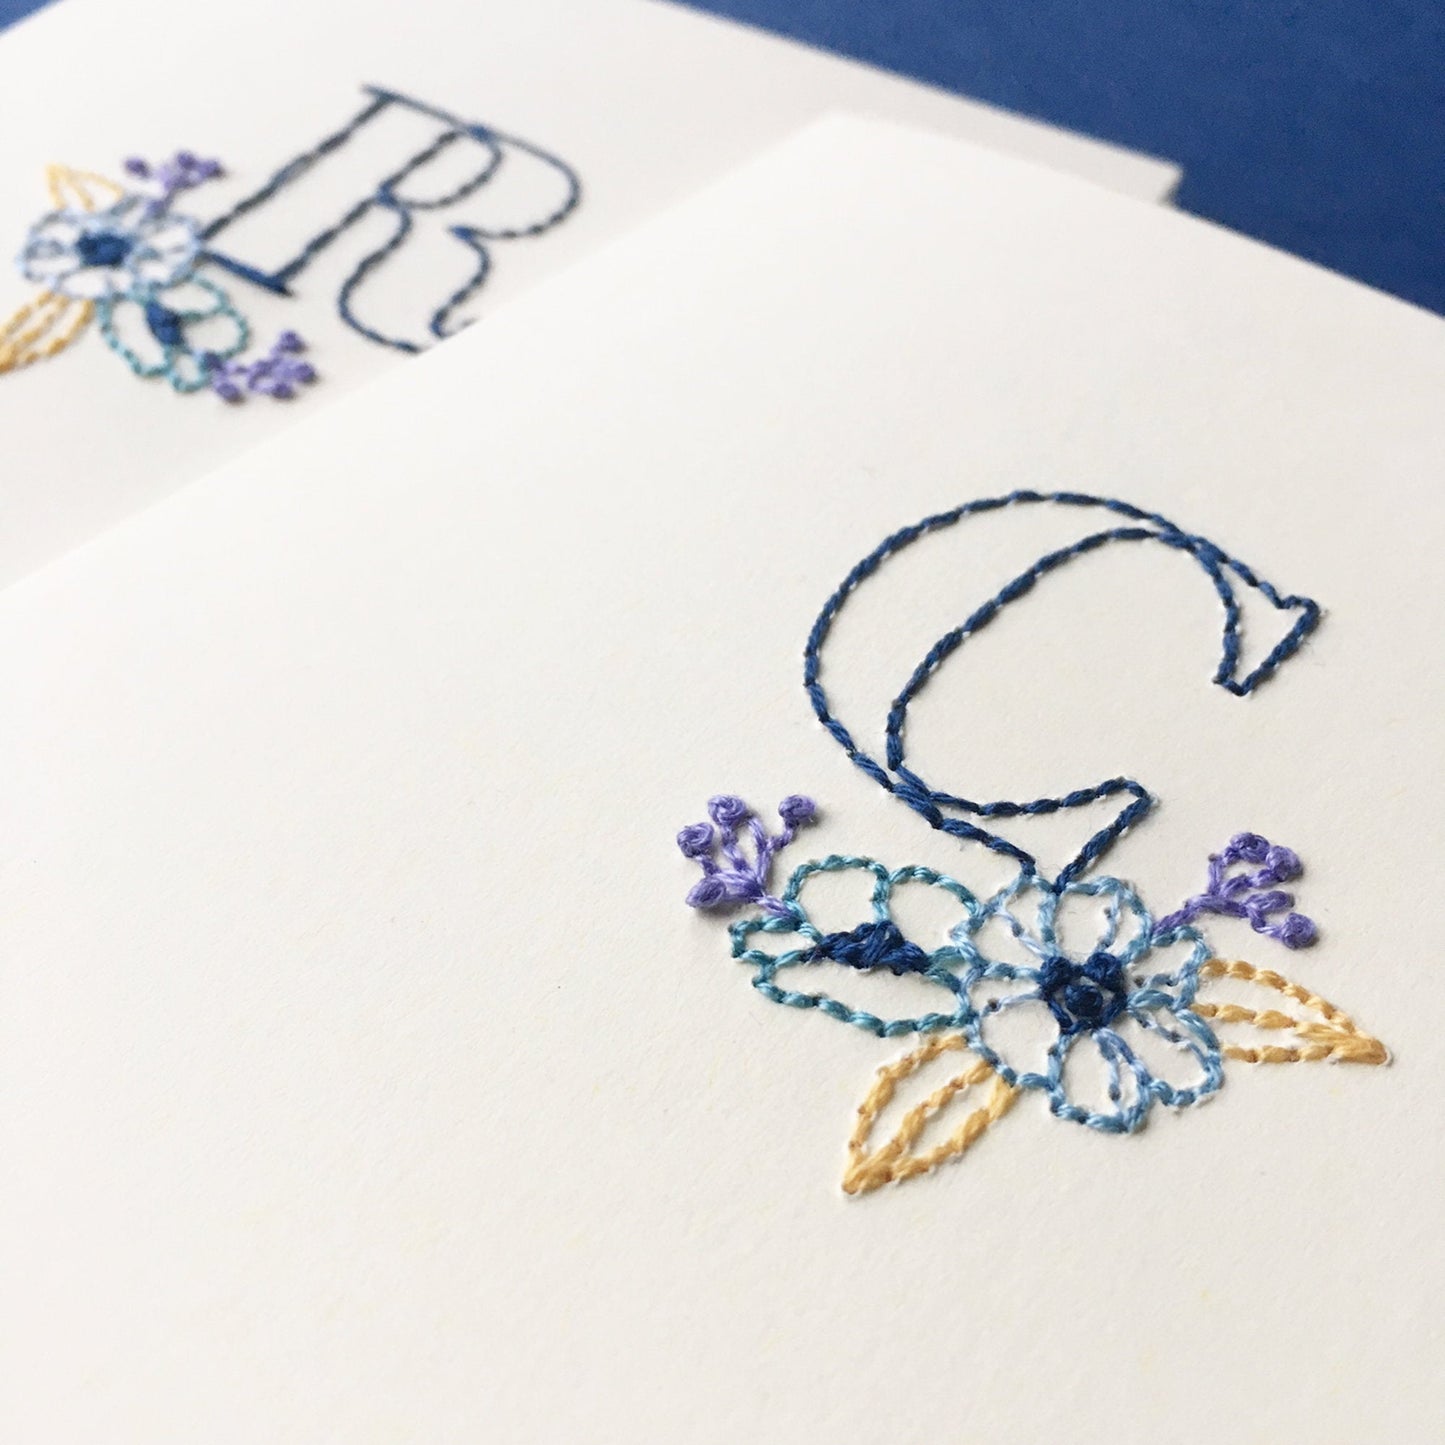 Hand-stitched Blue Floral Initial Card